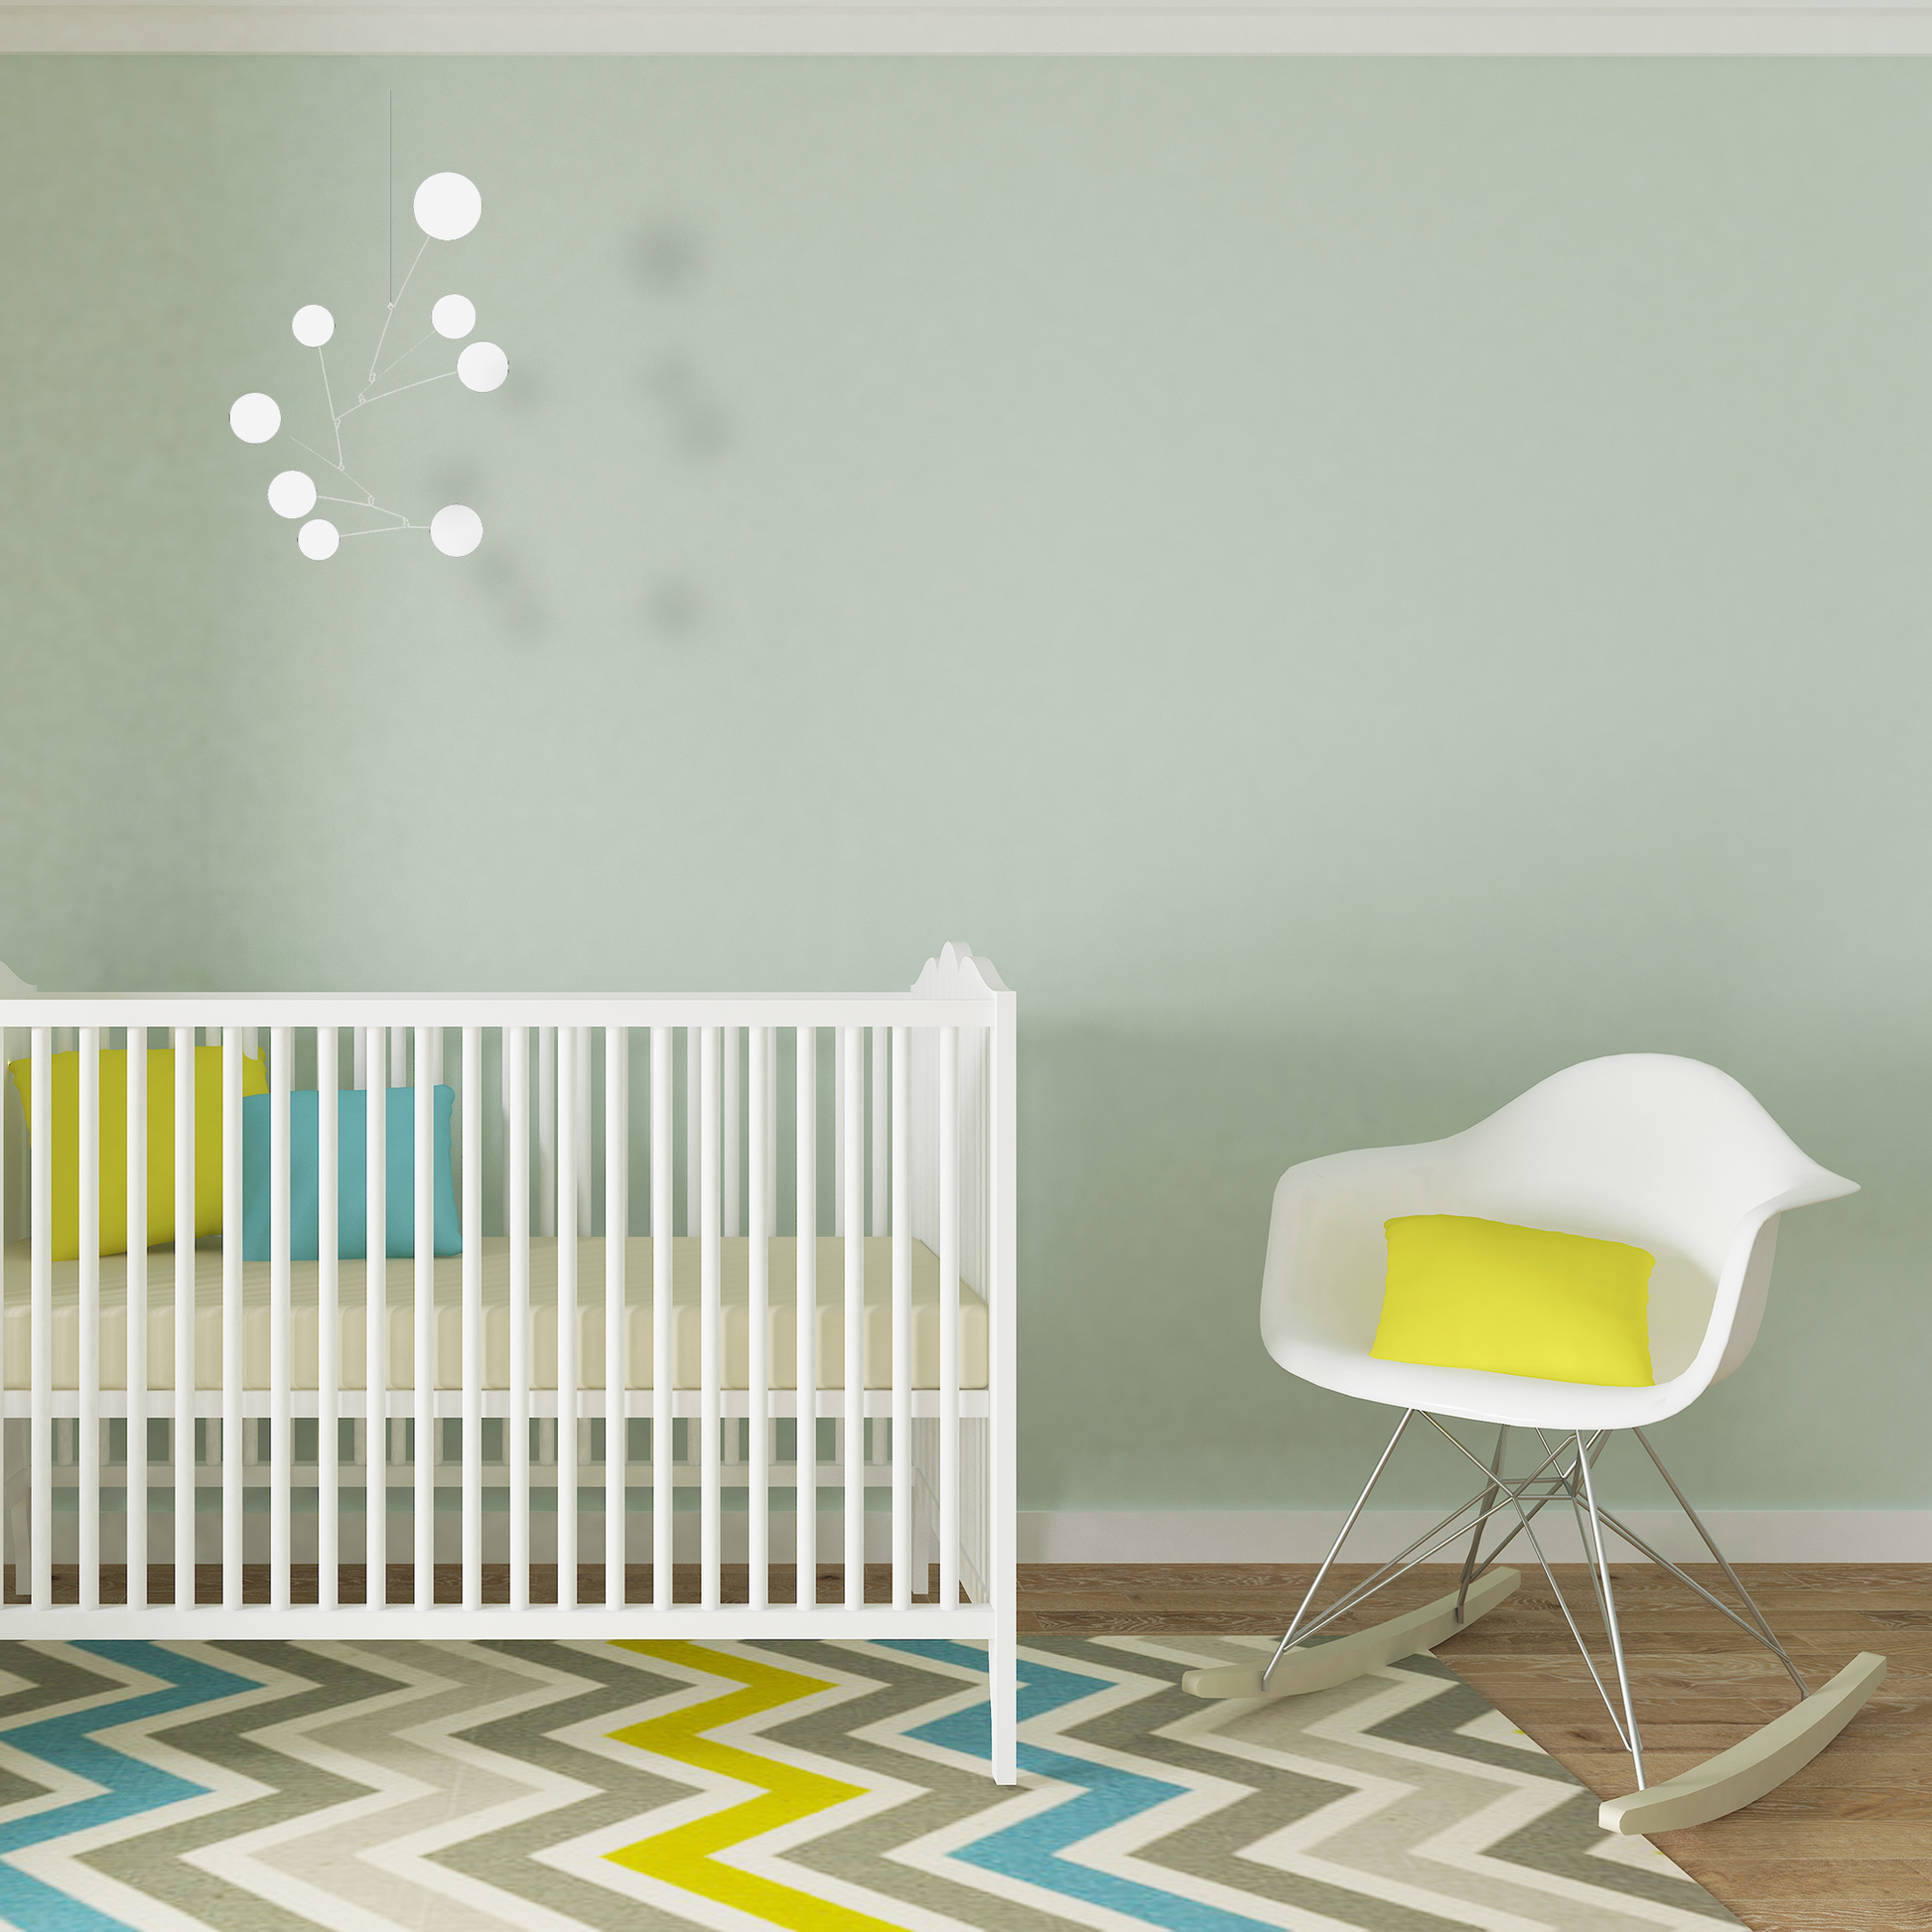 Delightful Exuberant Hanging Art Mobile in all white in lovely modern baby nursery with crib, eames rocking chair, and geometric rug - mid century modern inspired hanging kinetic art by AtomicMobiles.com